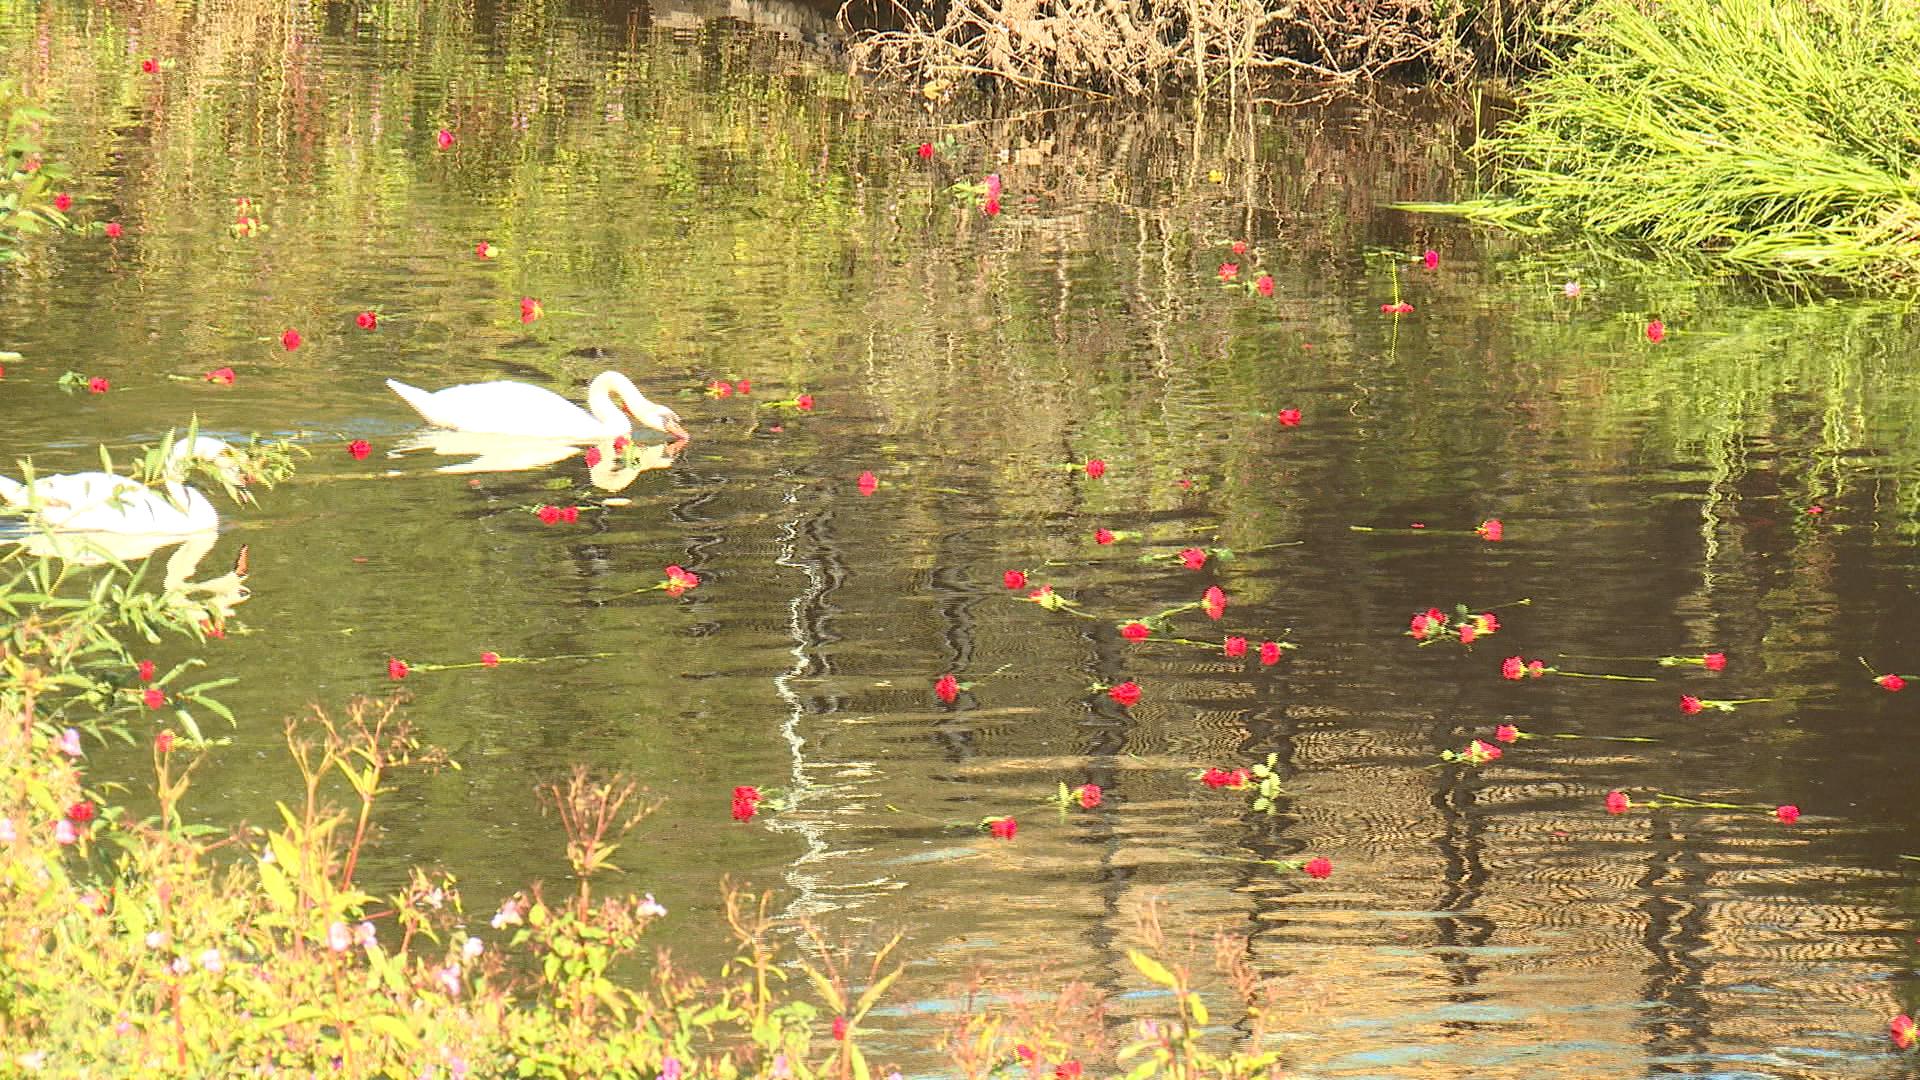 Roses placed in White Cart river remembering those lost to addiction.